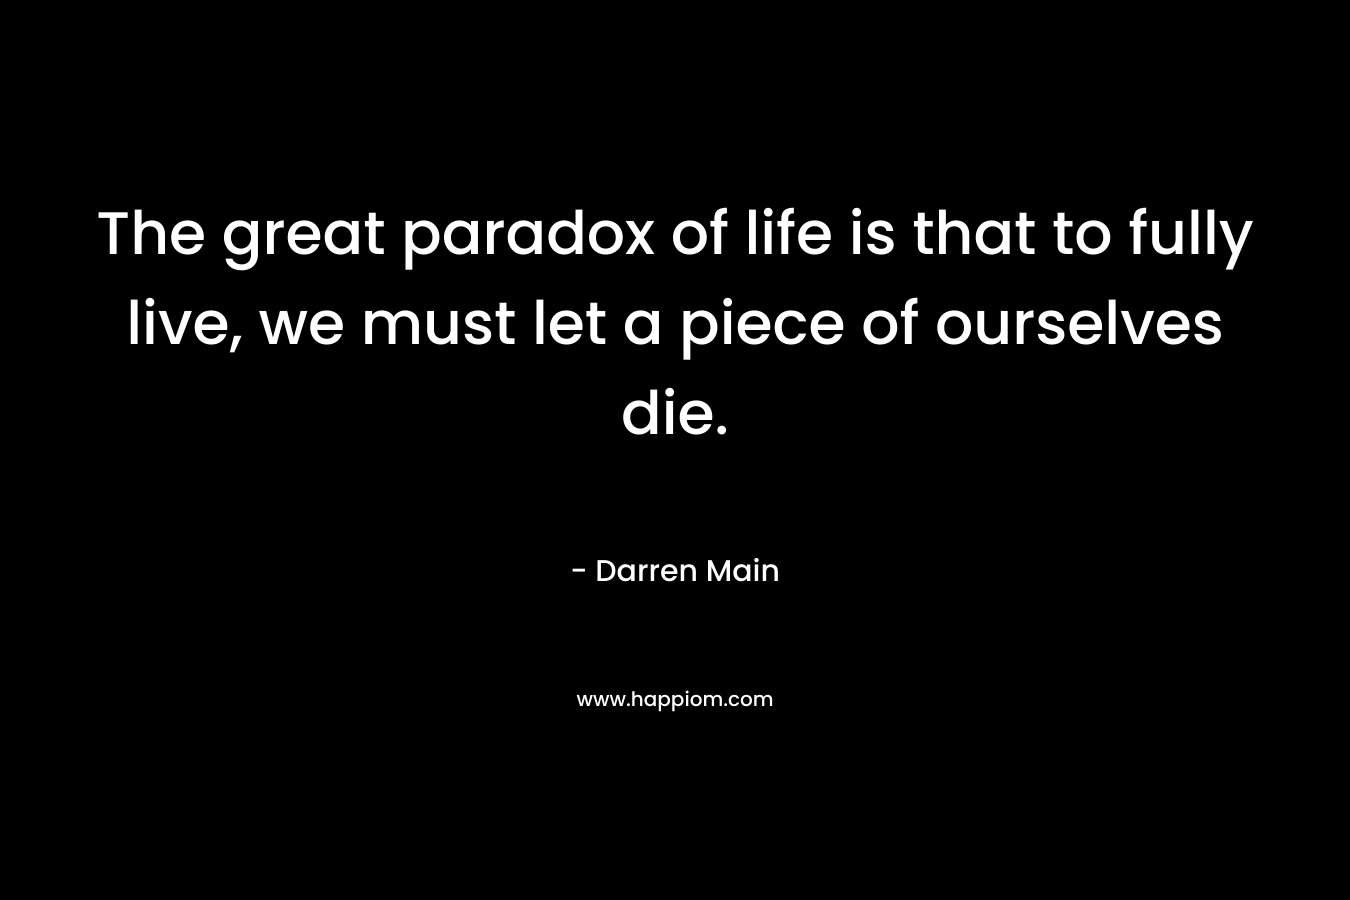 The great paradox of life is that to fully live, we must let a piece of ourselves die.